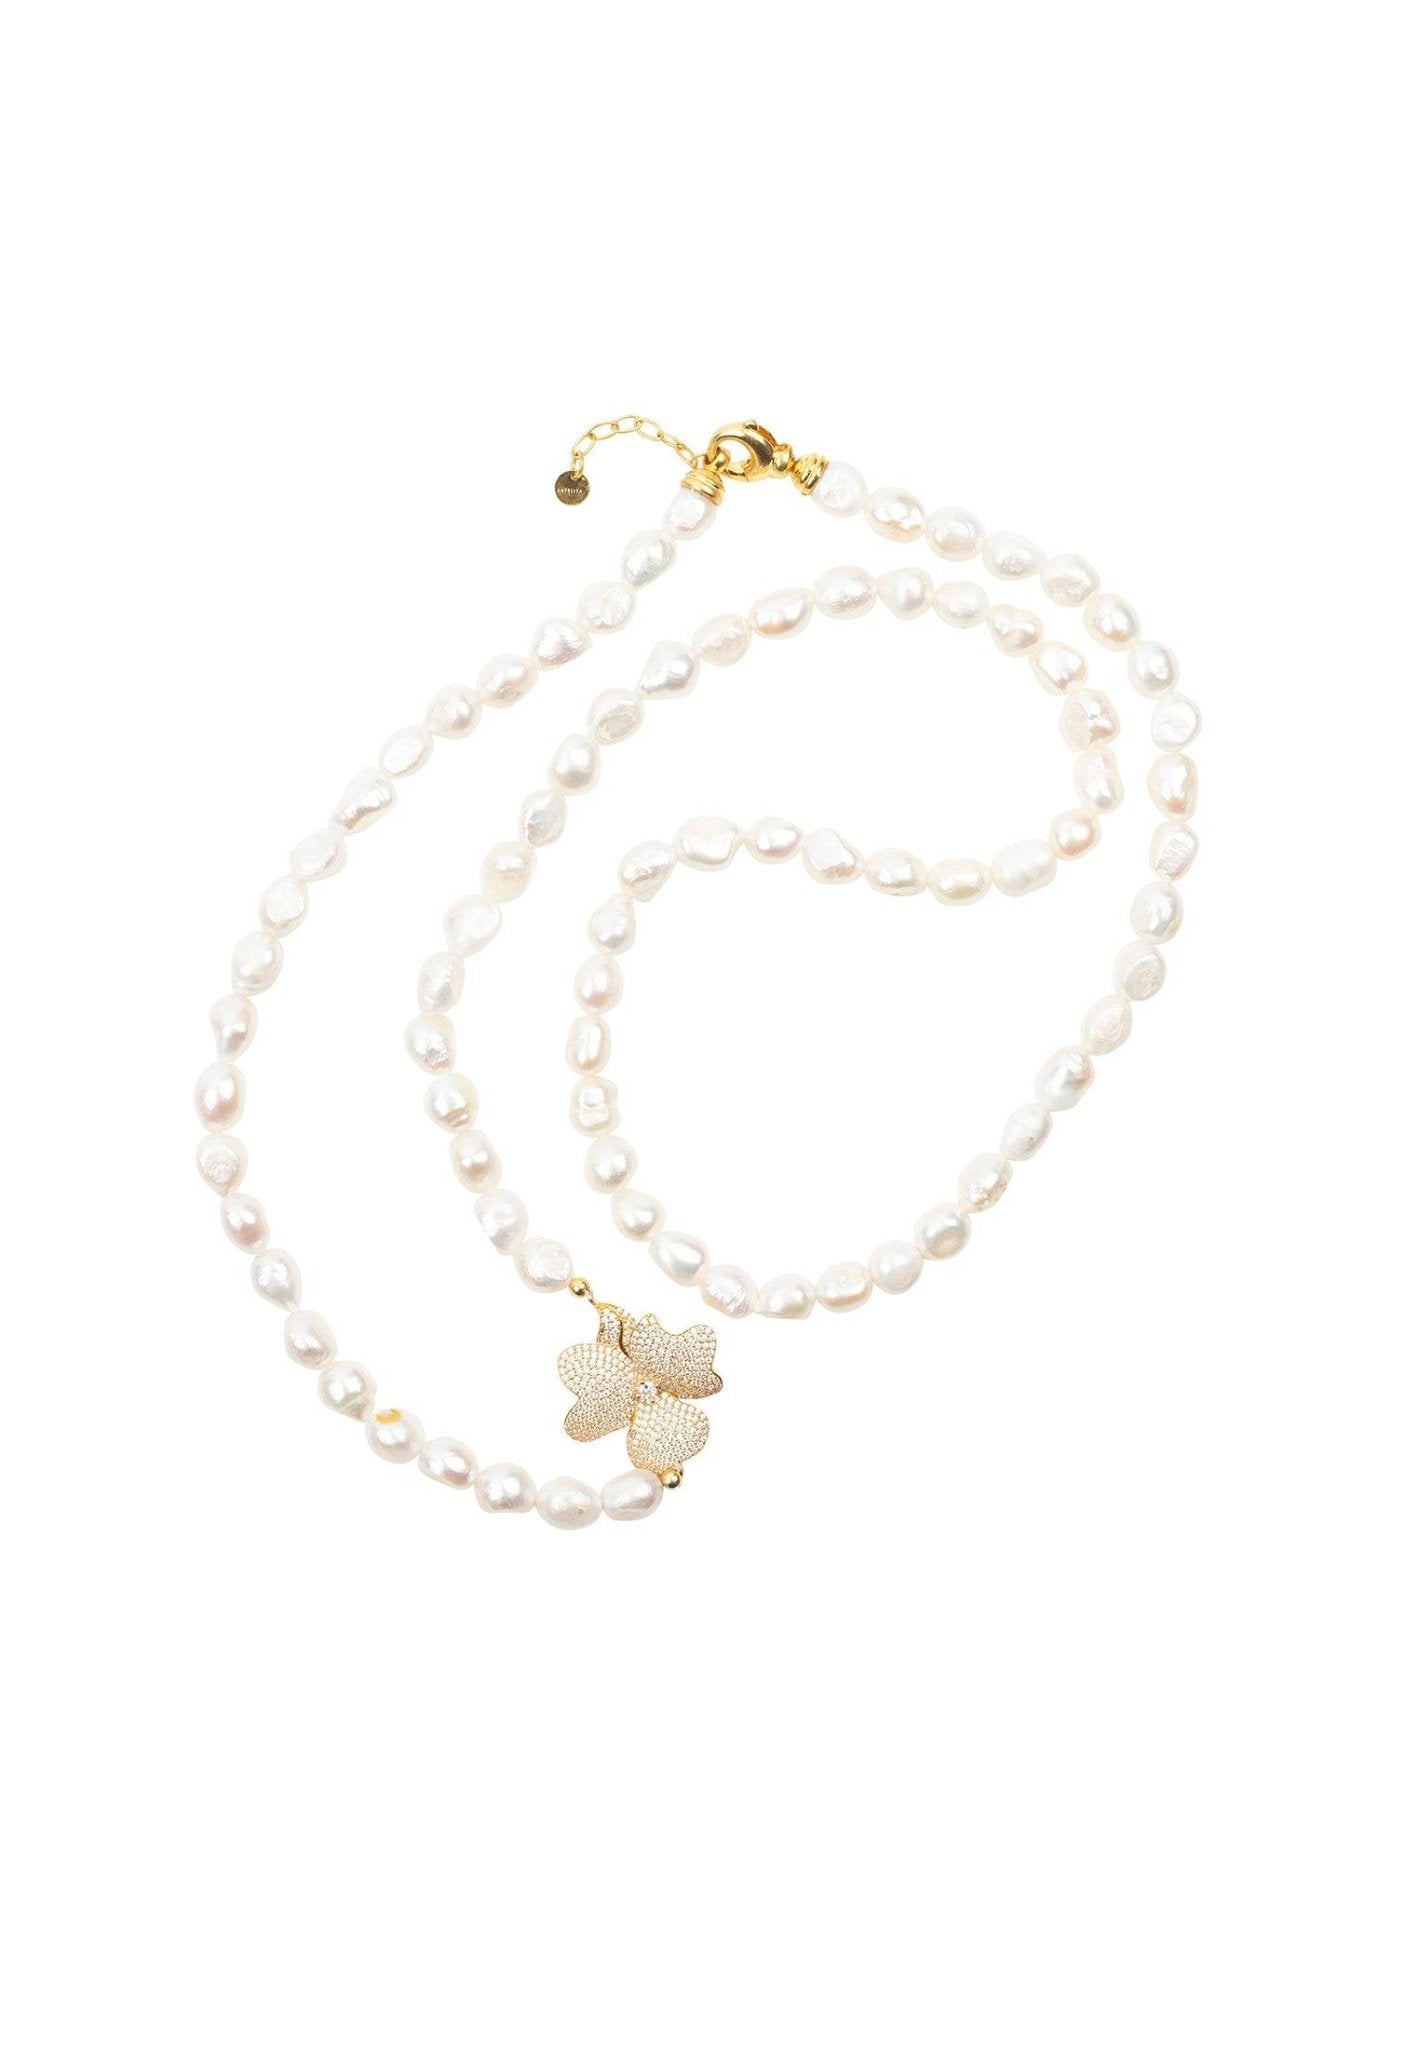 Flower Pearl Gemstone Long Necklace White Cz Gold - LATELITA Necklaces